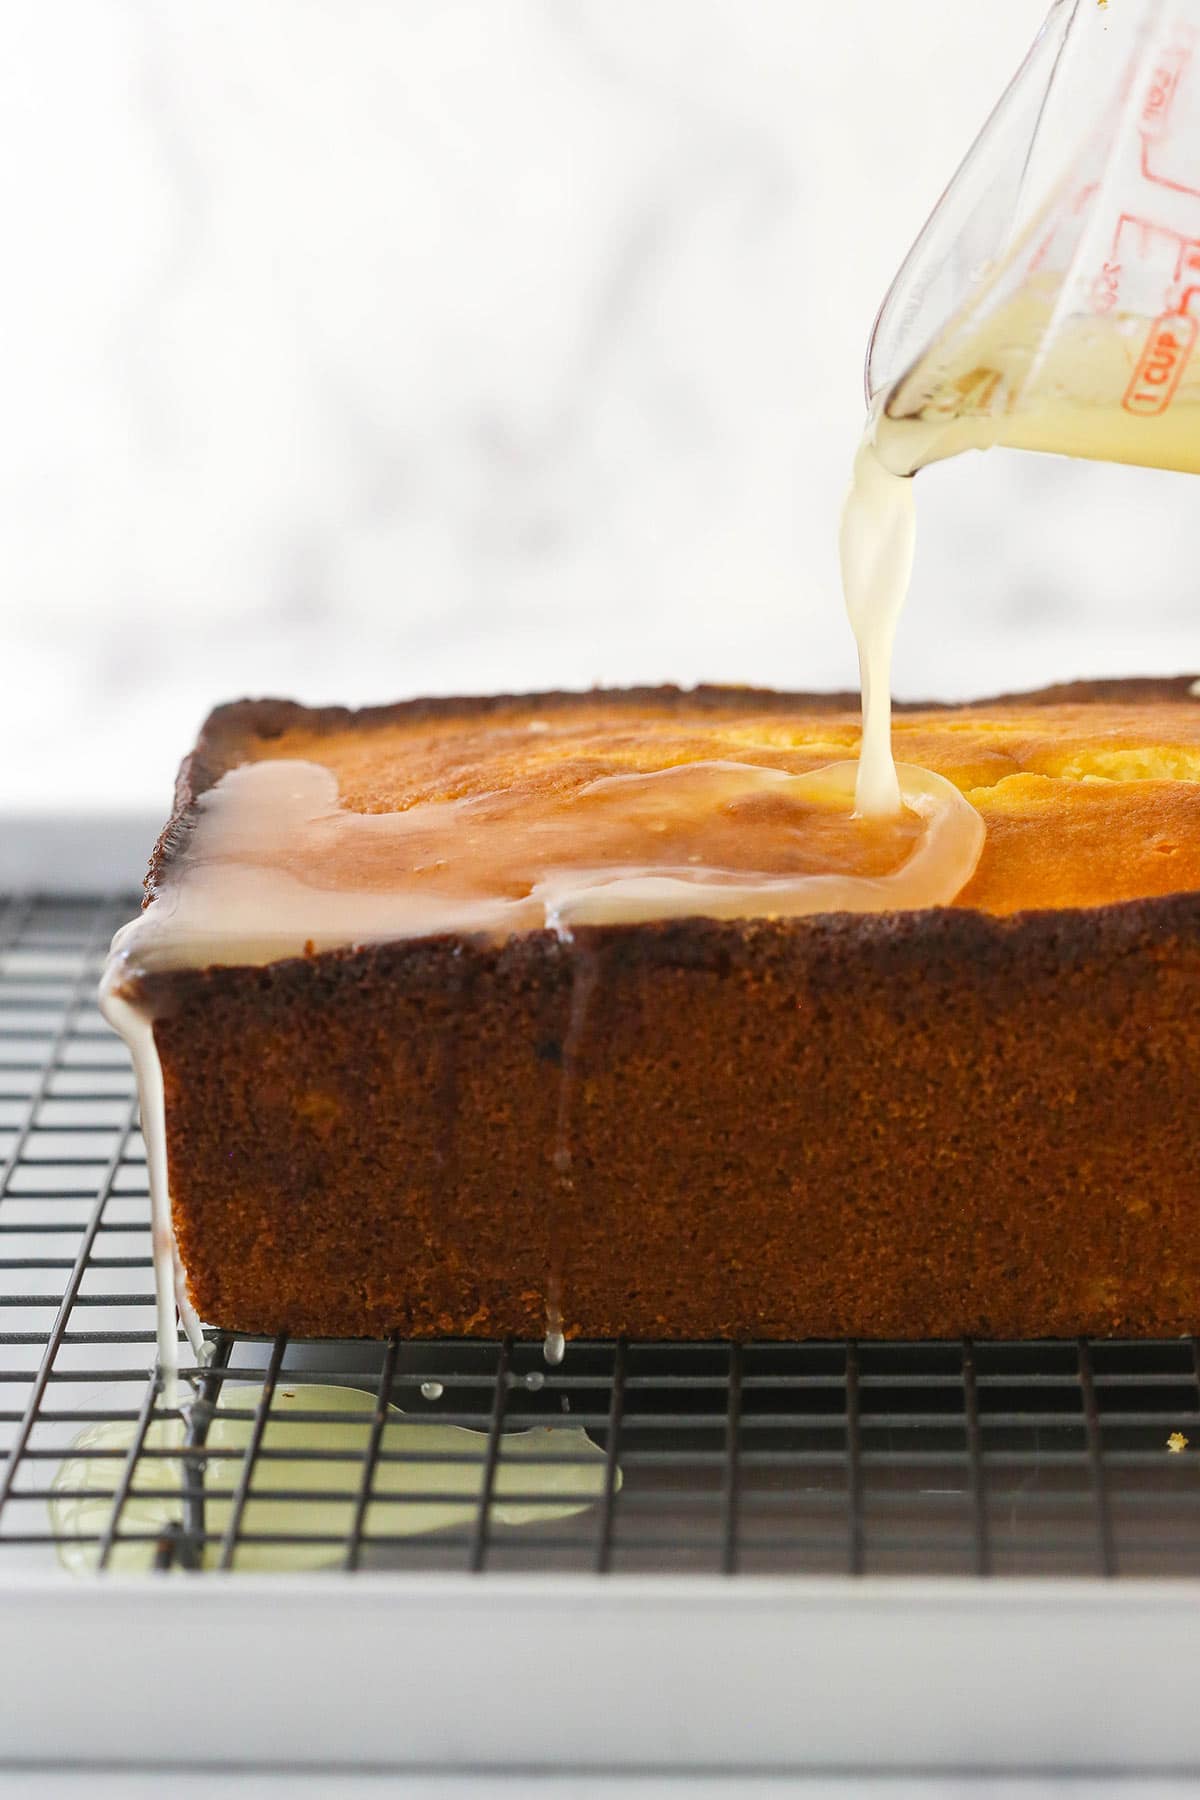 Lemon syrup being poured over the warm loaf cake while it's on a cooling rack with a baking sheet underneath it